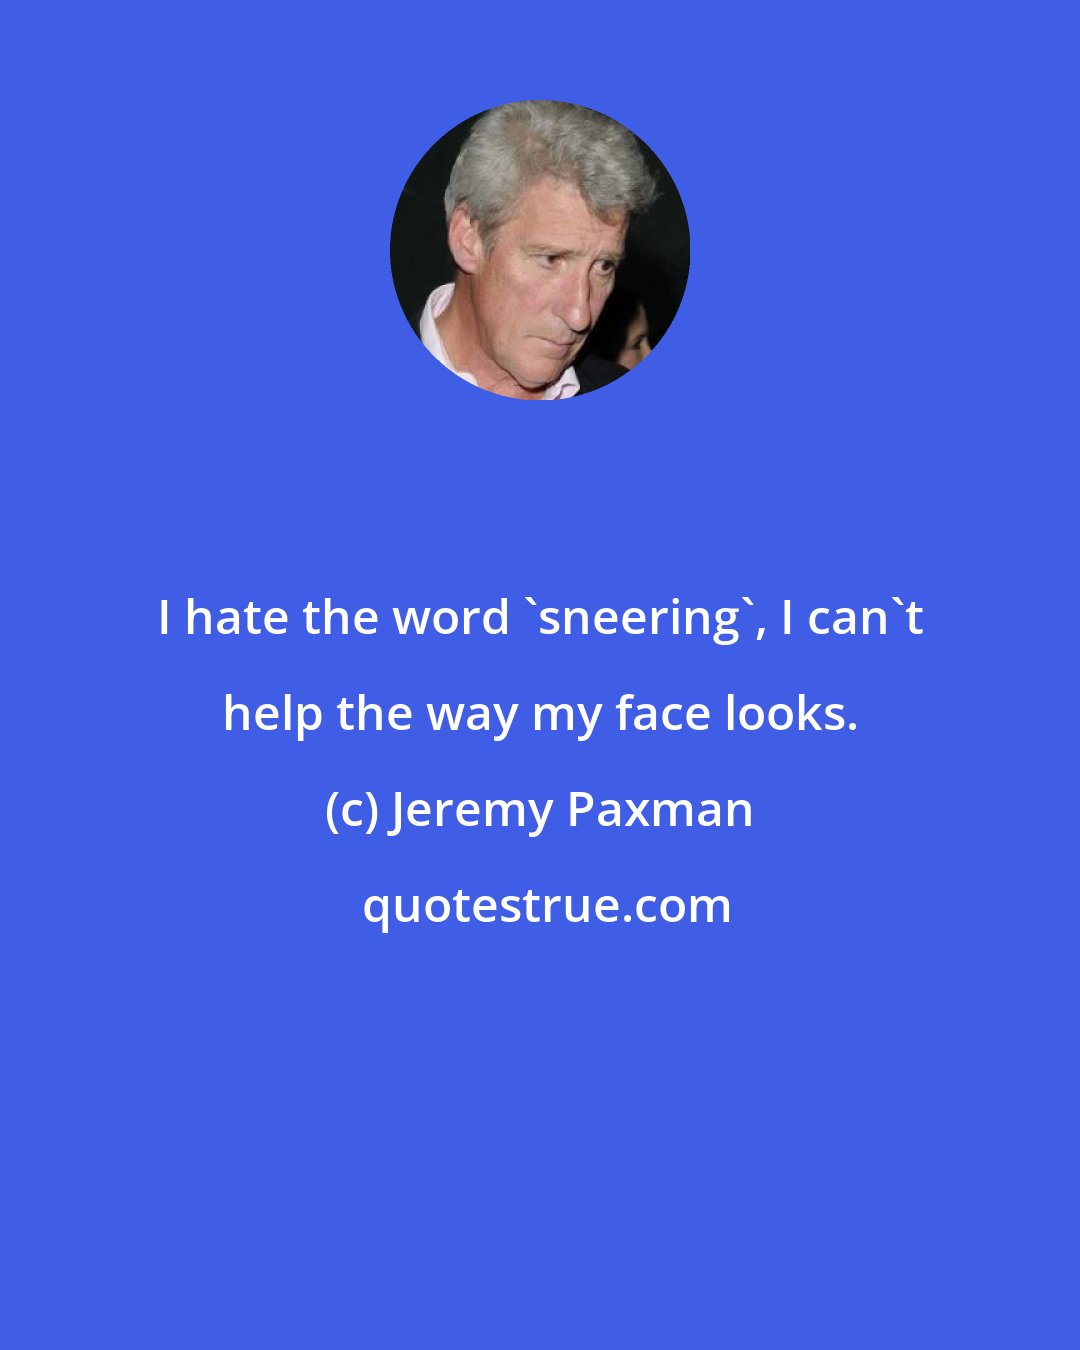 Jeremy Paxman: I hate the word 'sneering', I can't help the way my face looks.